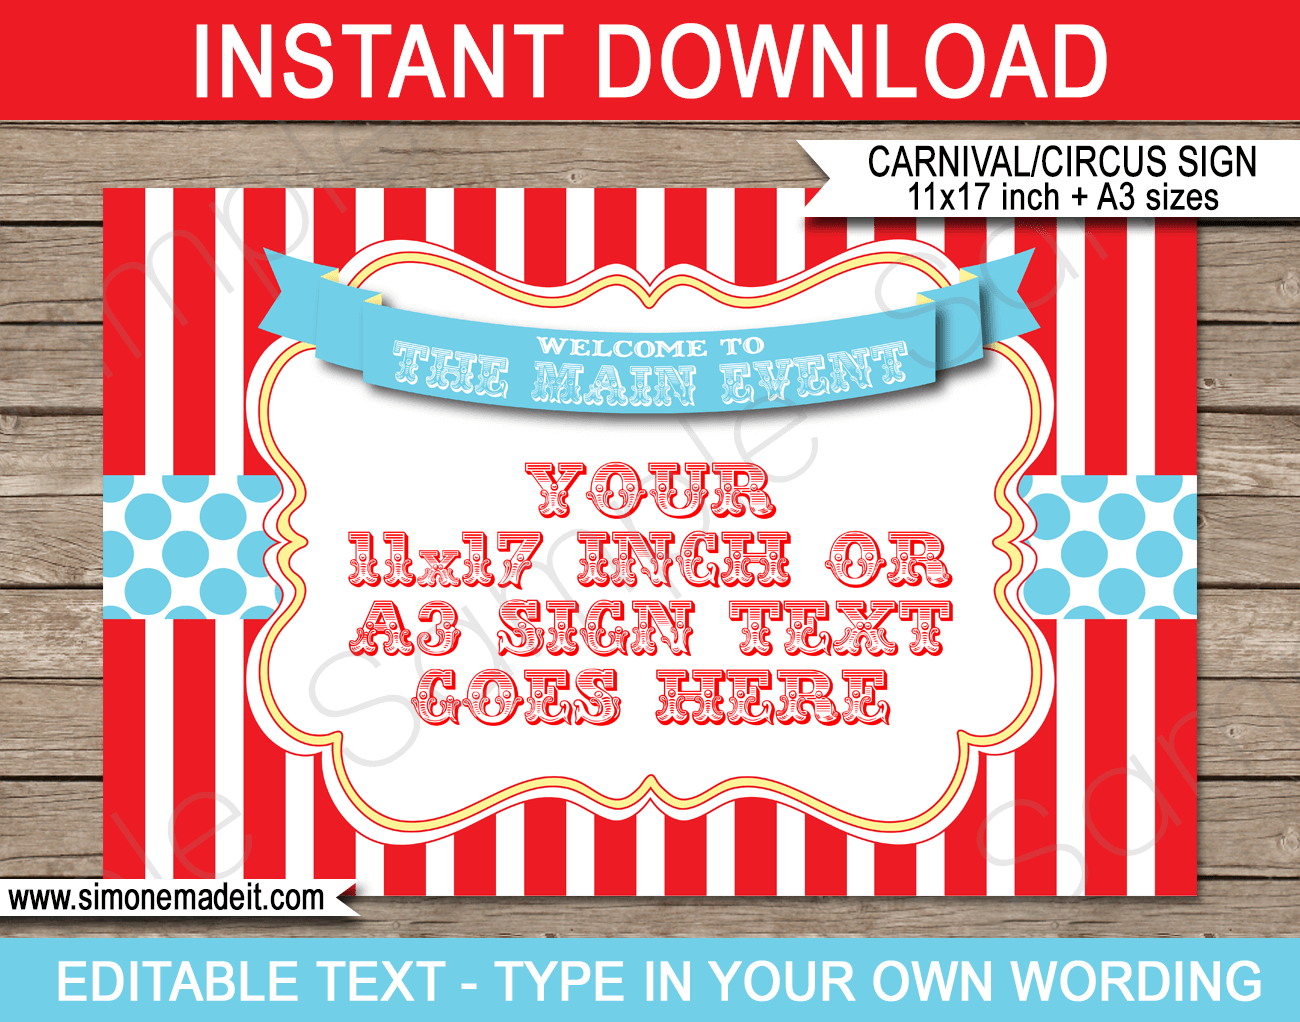 Printable Circus Welcome Sign Template with Editable Text | Carnival Theme Party Decorations | $4.00 Instant Download via SIMONEmadeit.com